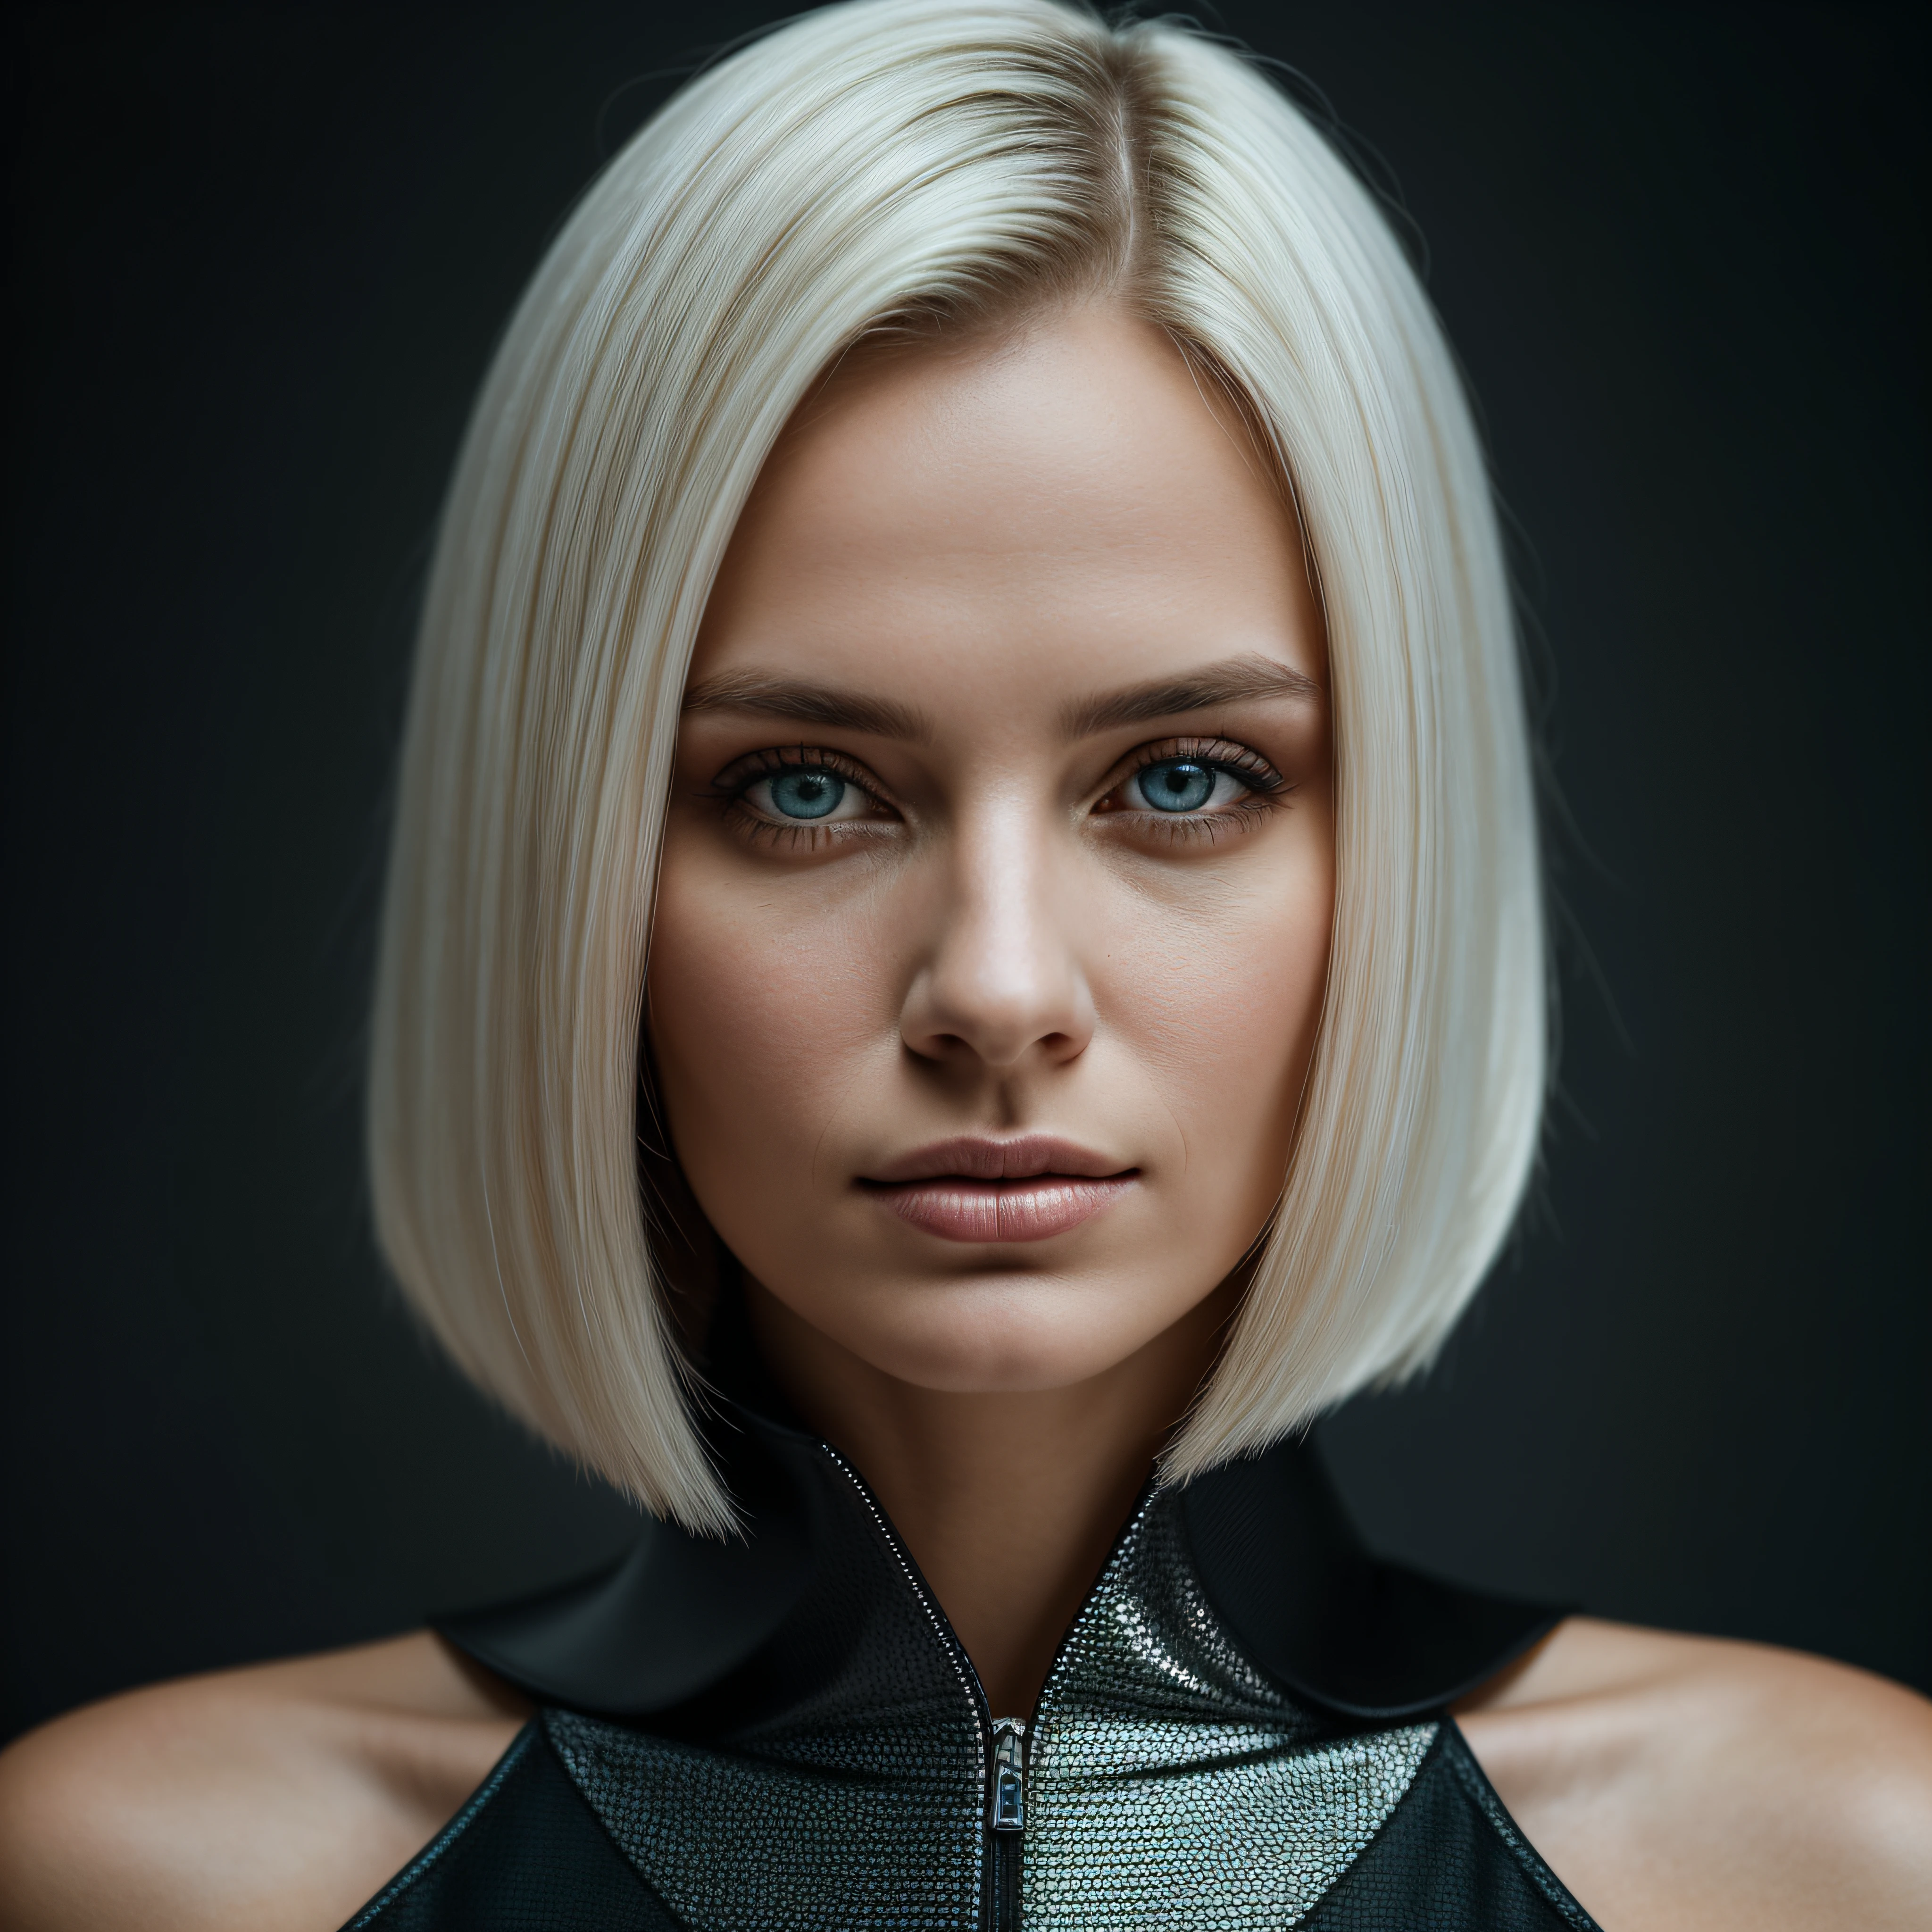 (wide shot), (futuristic hexagonal fashion style, deus ex aesthetic), (authentic expressive eyes: 1.2), An exquisite portrait of a Scandinavian woman (with pale white skin: 1.3) and dark makeup, the photograph captured in stunning 8k resolution and raw format to preserve the highest quality of details. The woman's beauty is undeniable. She wears futuristic angular clothing that complements her soft features, (her eyes are portrayed with meticulous attention to detail: 1.3), showcasing the captivating depth within her eyes. The photograph is taken with a lens that emphasizes the gentle smile in her eyes, and the backdrop is a dark studio setting that enhances the muted colours of the scene. The lighting and shadows are expertly crafted to bring out the richness of her skin tone and the subtle nuances of her features. Her white hair with black sides, with its distinct hue, adds a touch of contrast against her white skin. The interior setting adds a sense of intimacy. The overall composition captures her essence with authenticity and grace, creating a portrait that celebrates her heritage and beauty. Photography utilizing the best techniques for shadow and lighting, to create a mesmerizing portrayal that transcends the visual, slightly tilted head, (extreme eye details: 1.4)